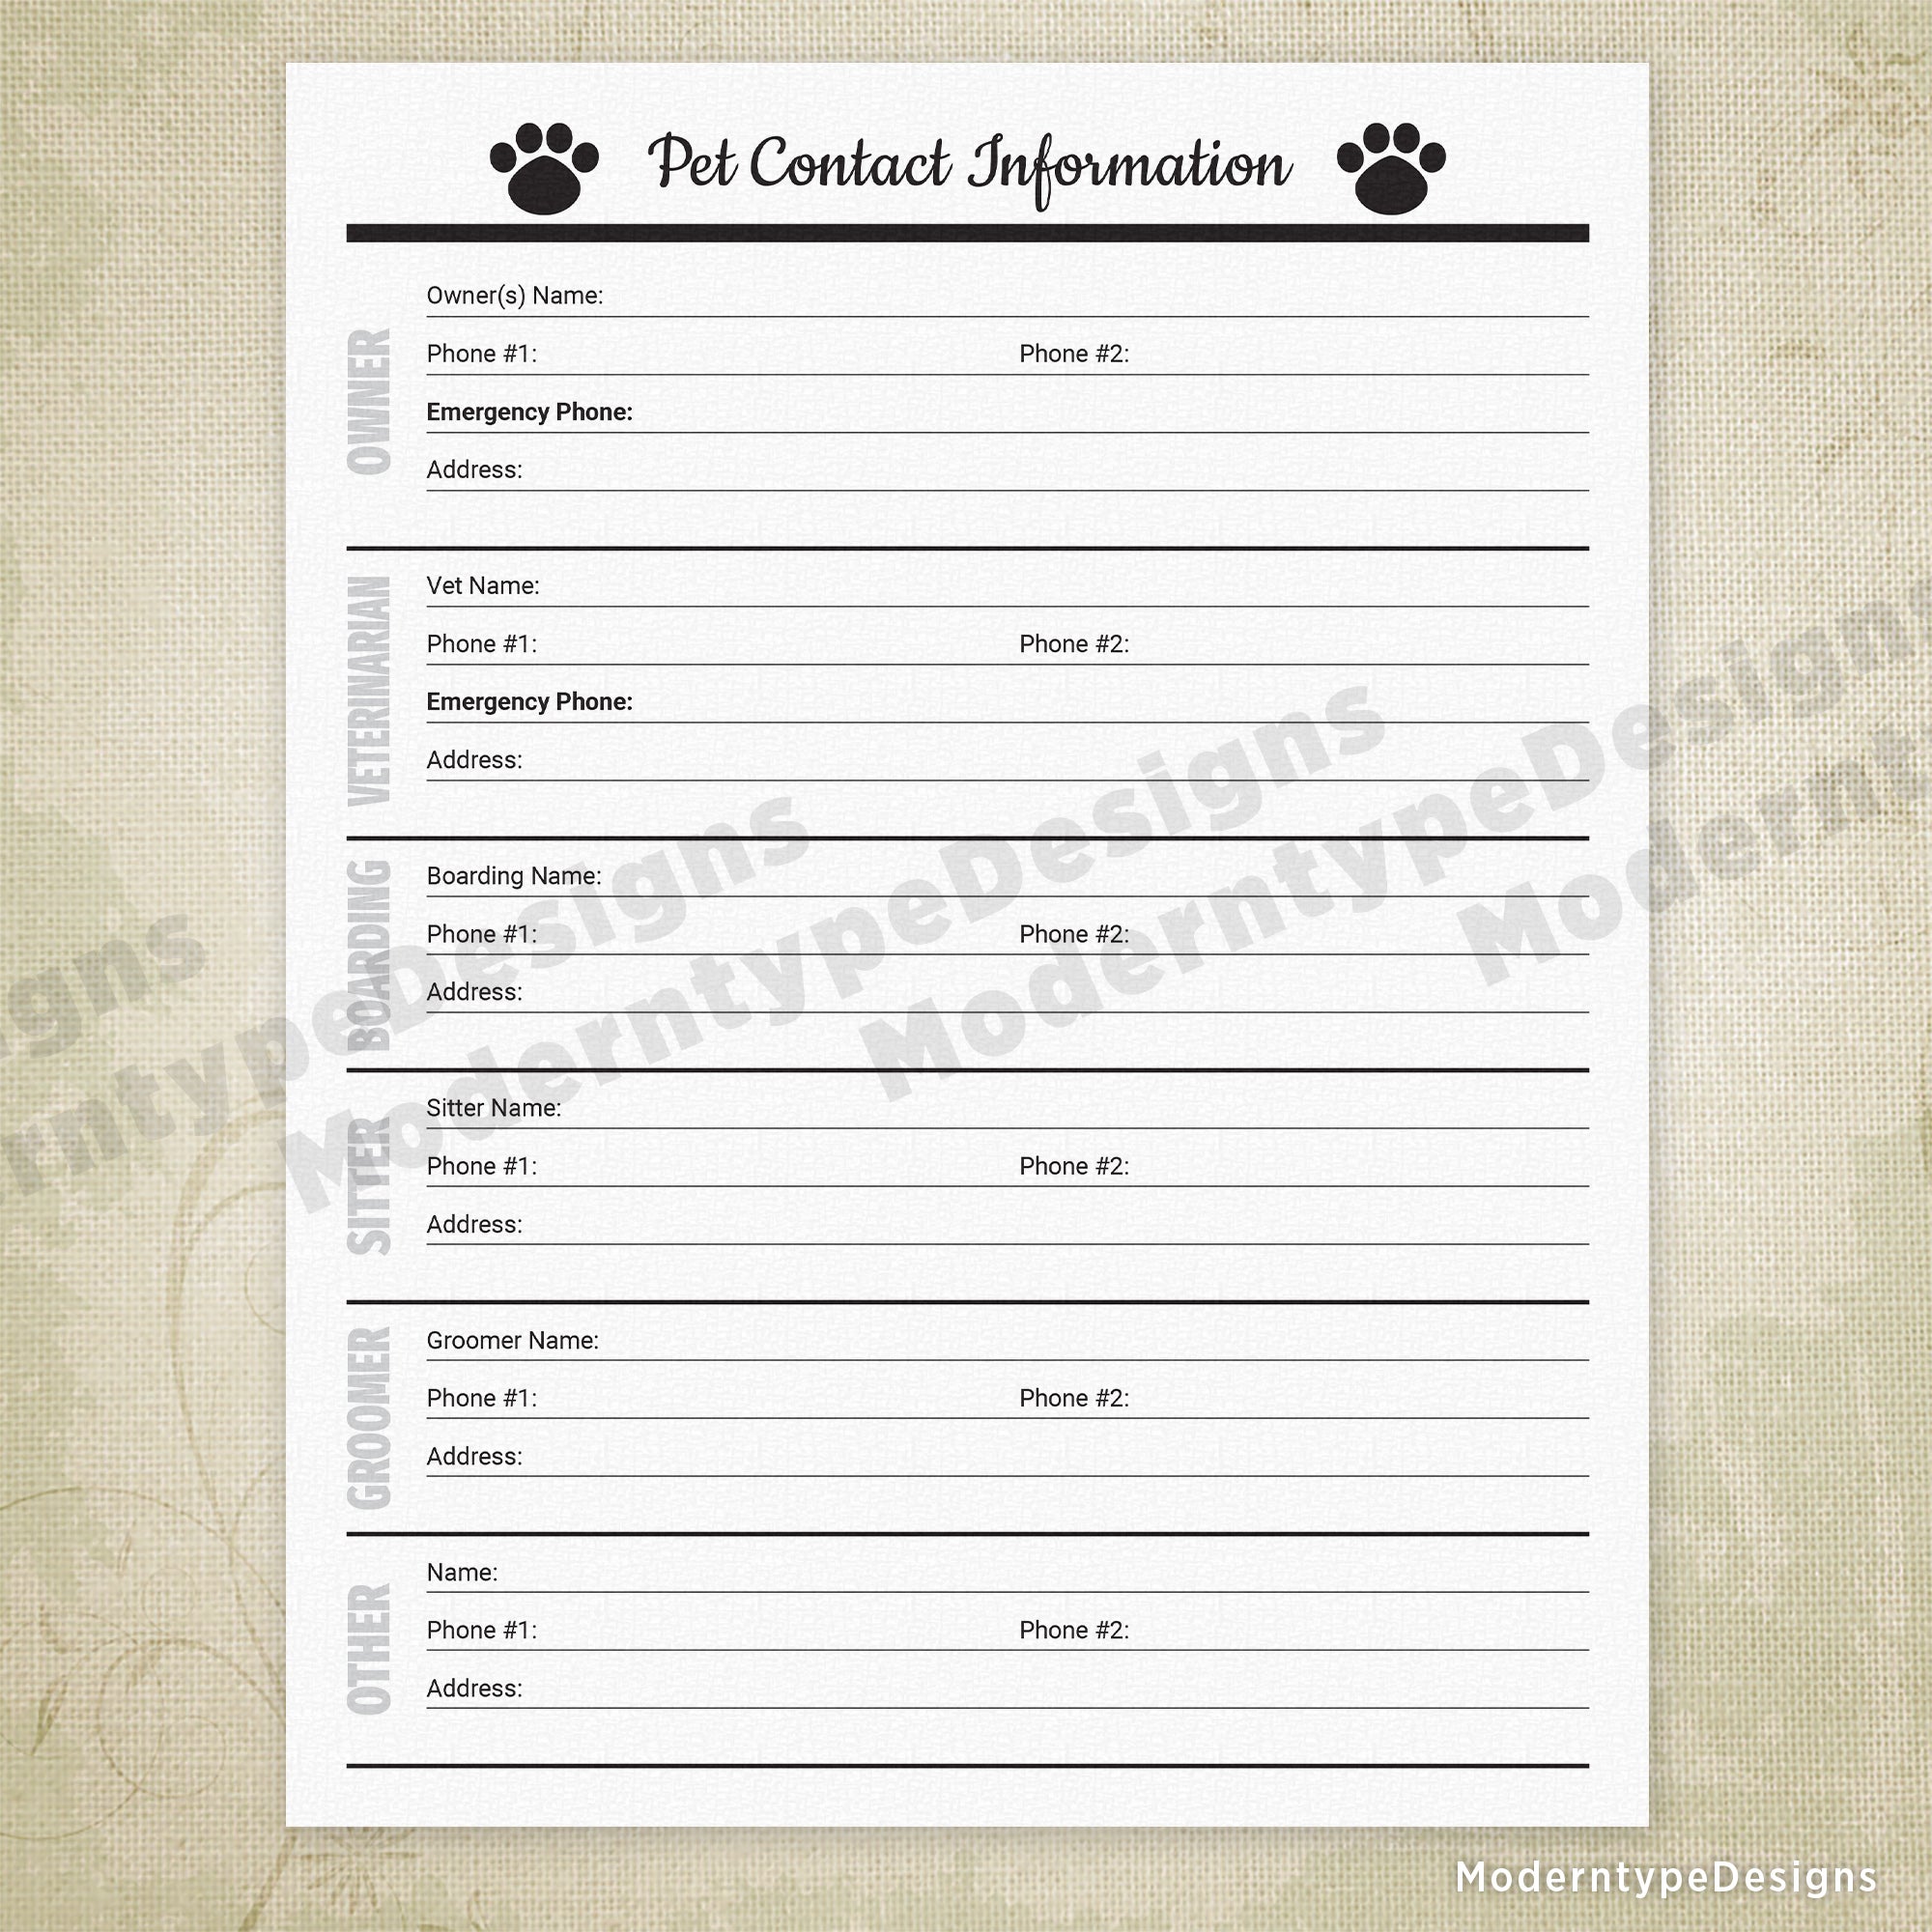 Pet Contact Info Printable for Pet Owners & Businesses